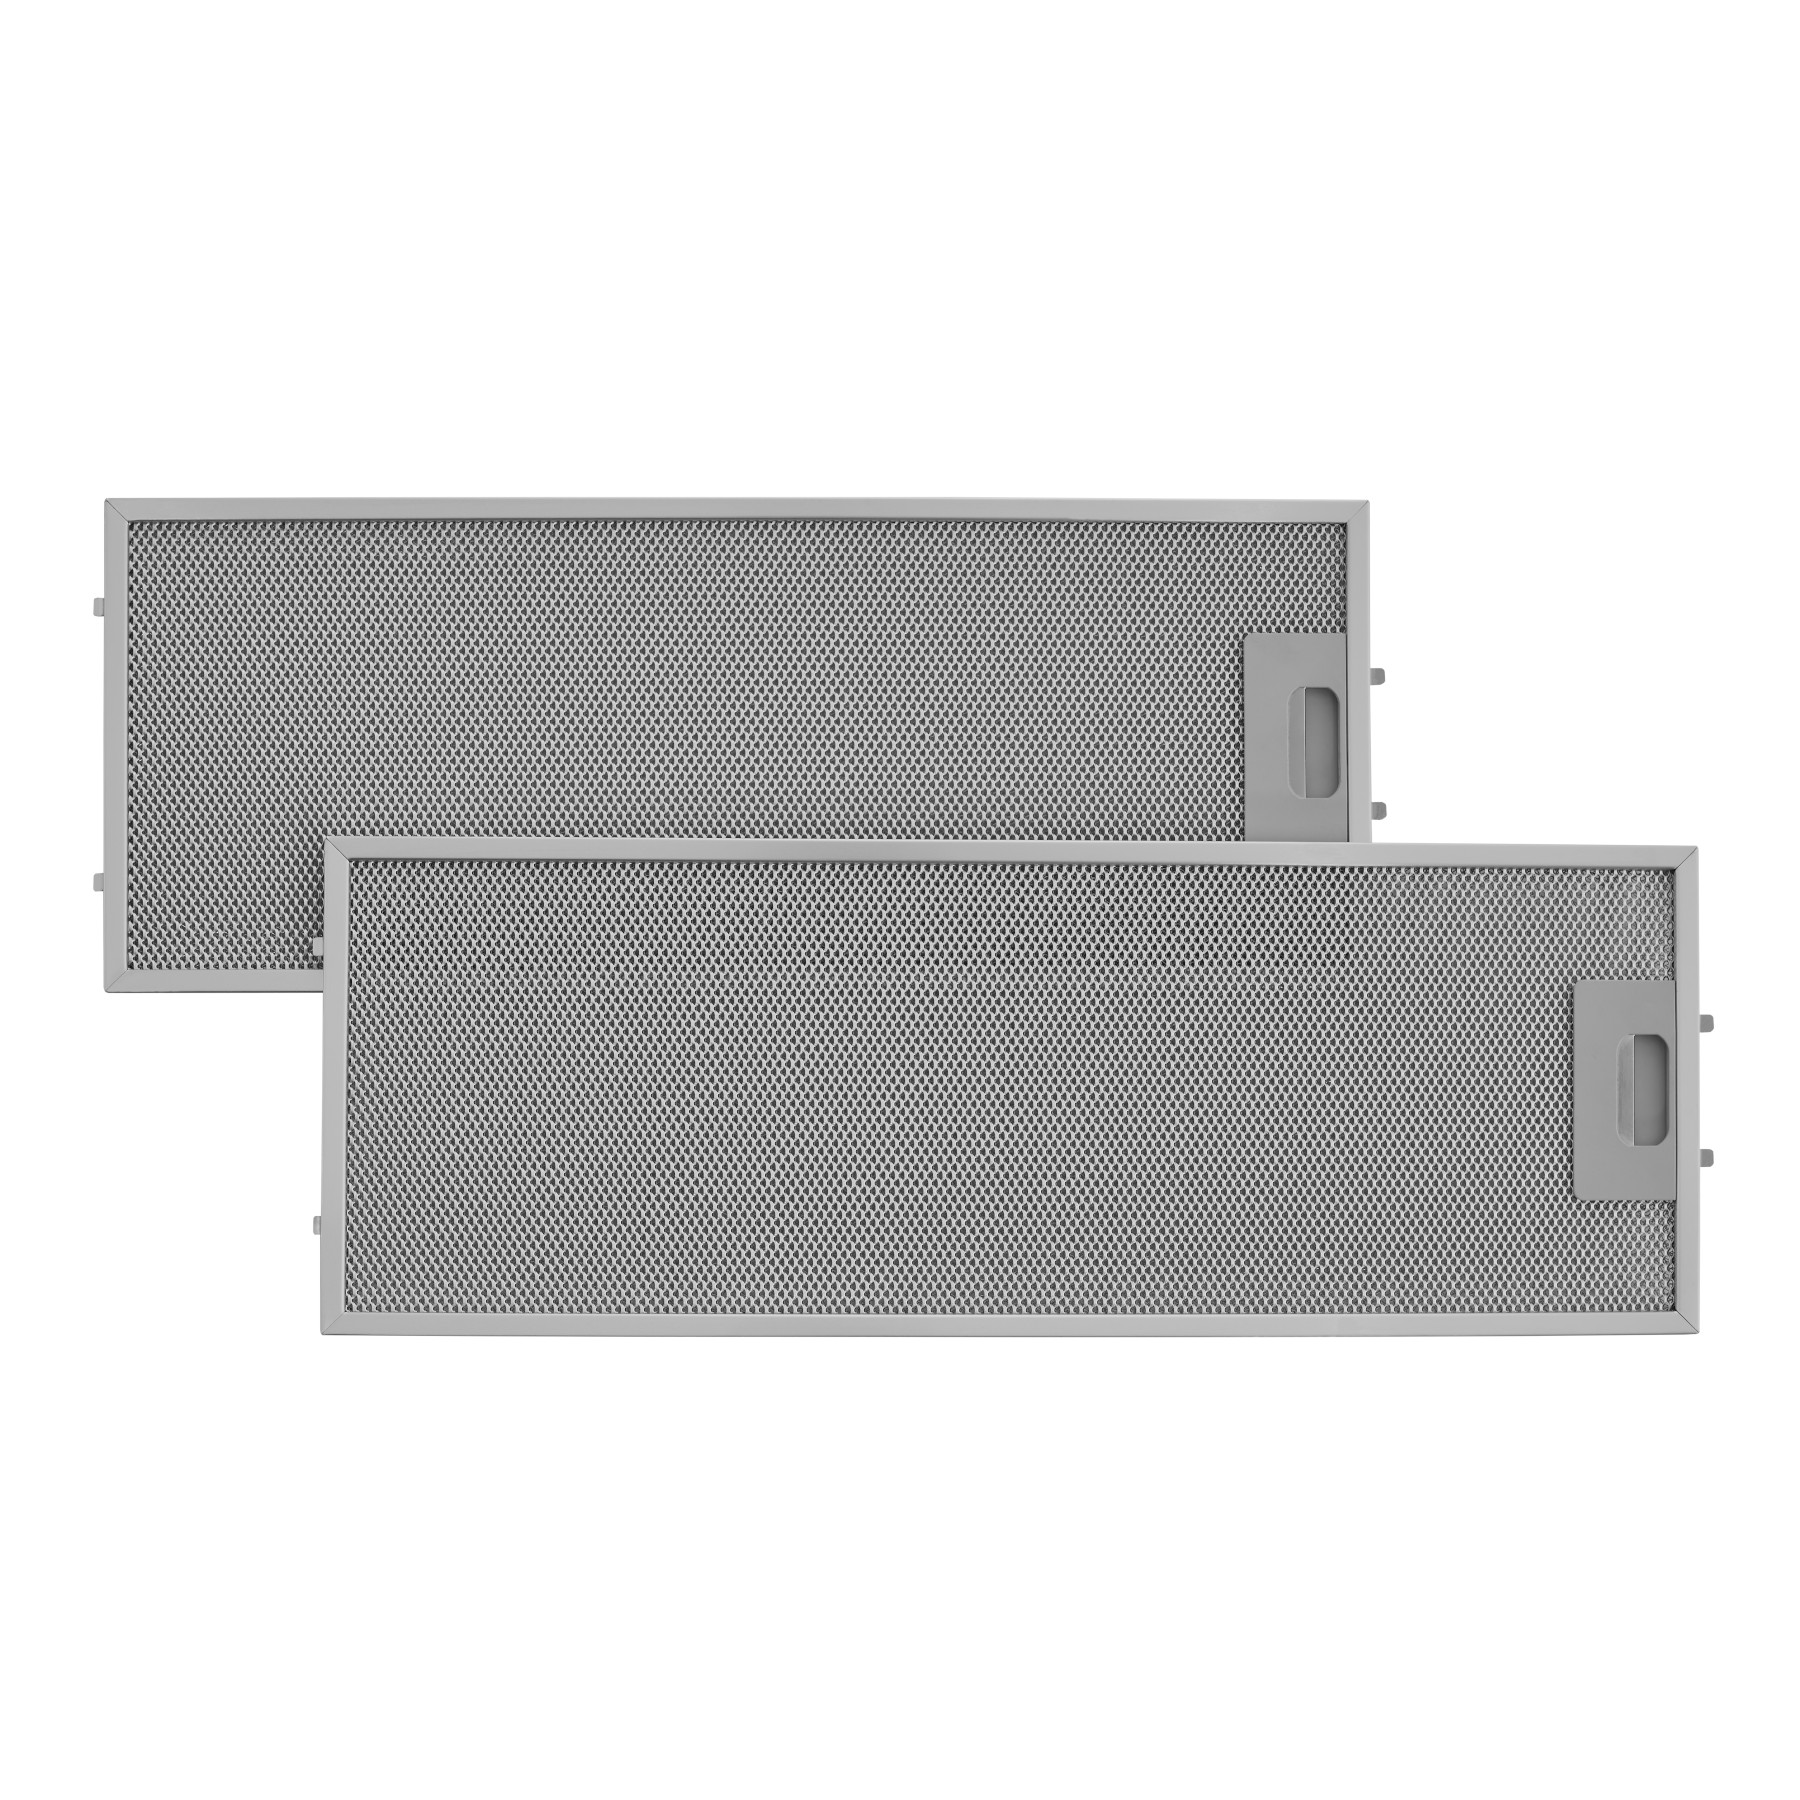 Grease Replacement Filter for 24-inch and 30-inch Broan® Elite EBS1 Slide-out Range Hood Series